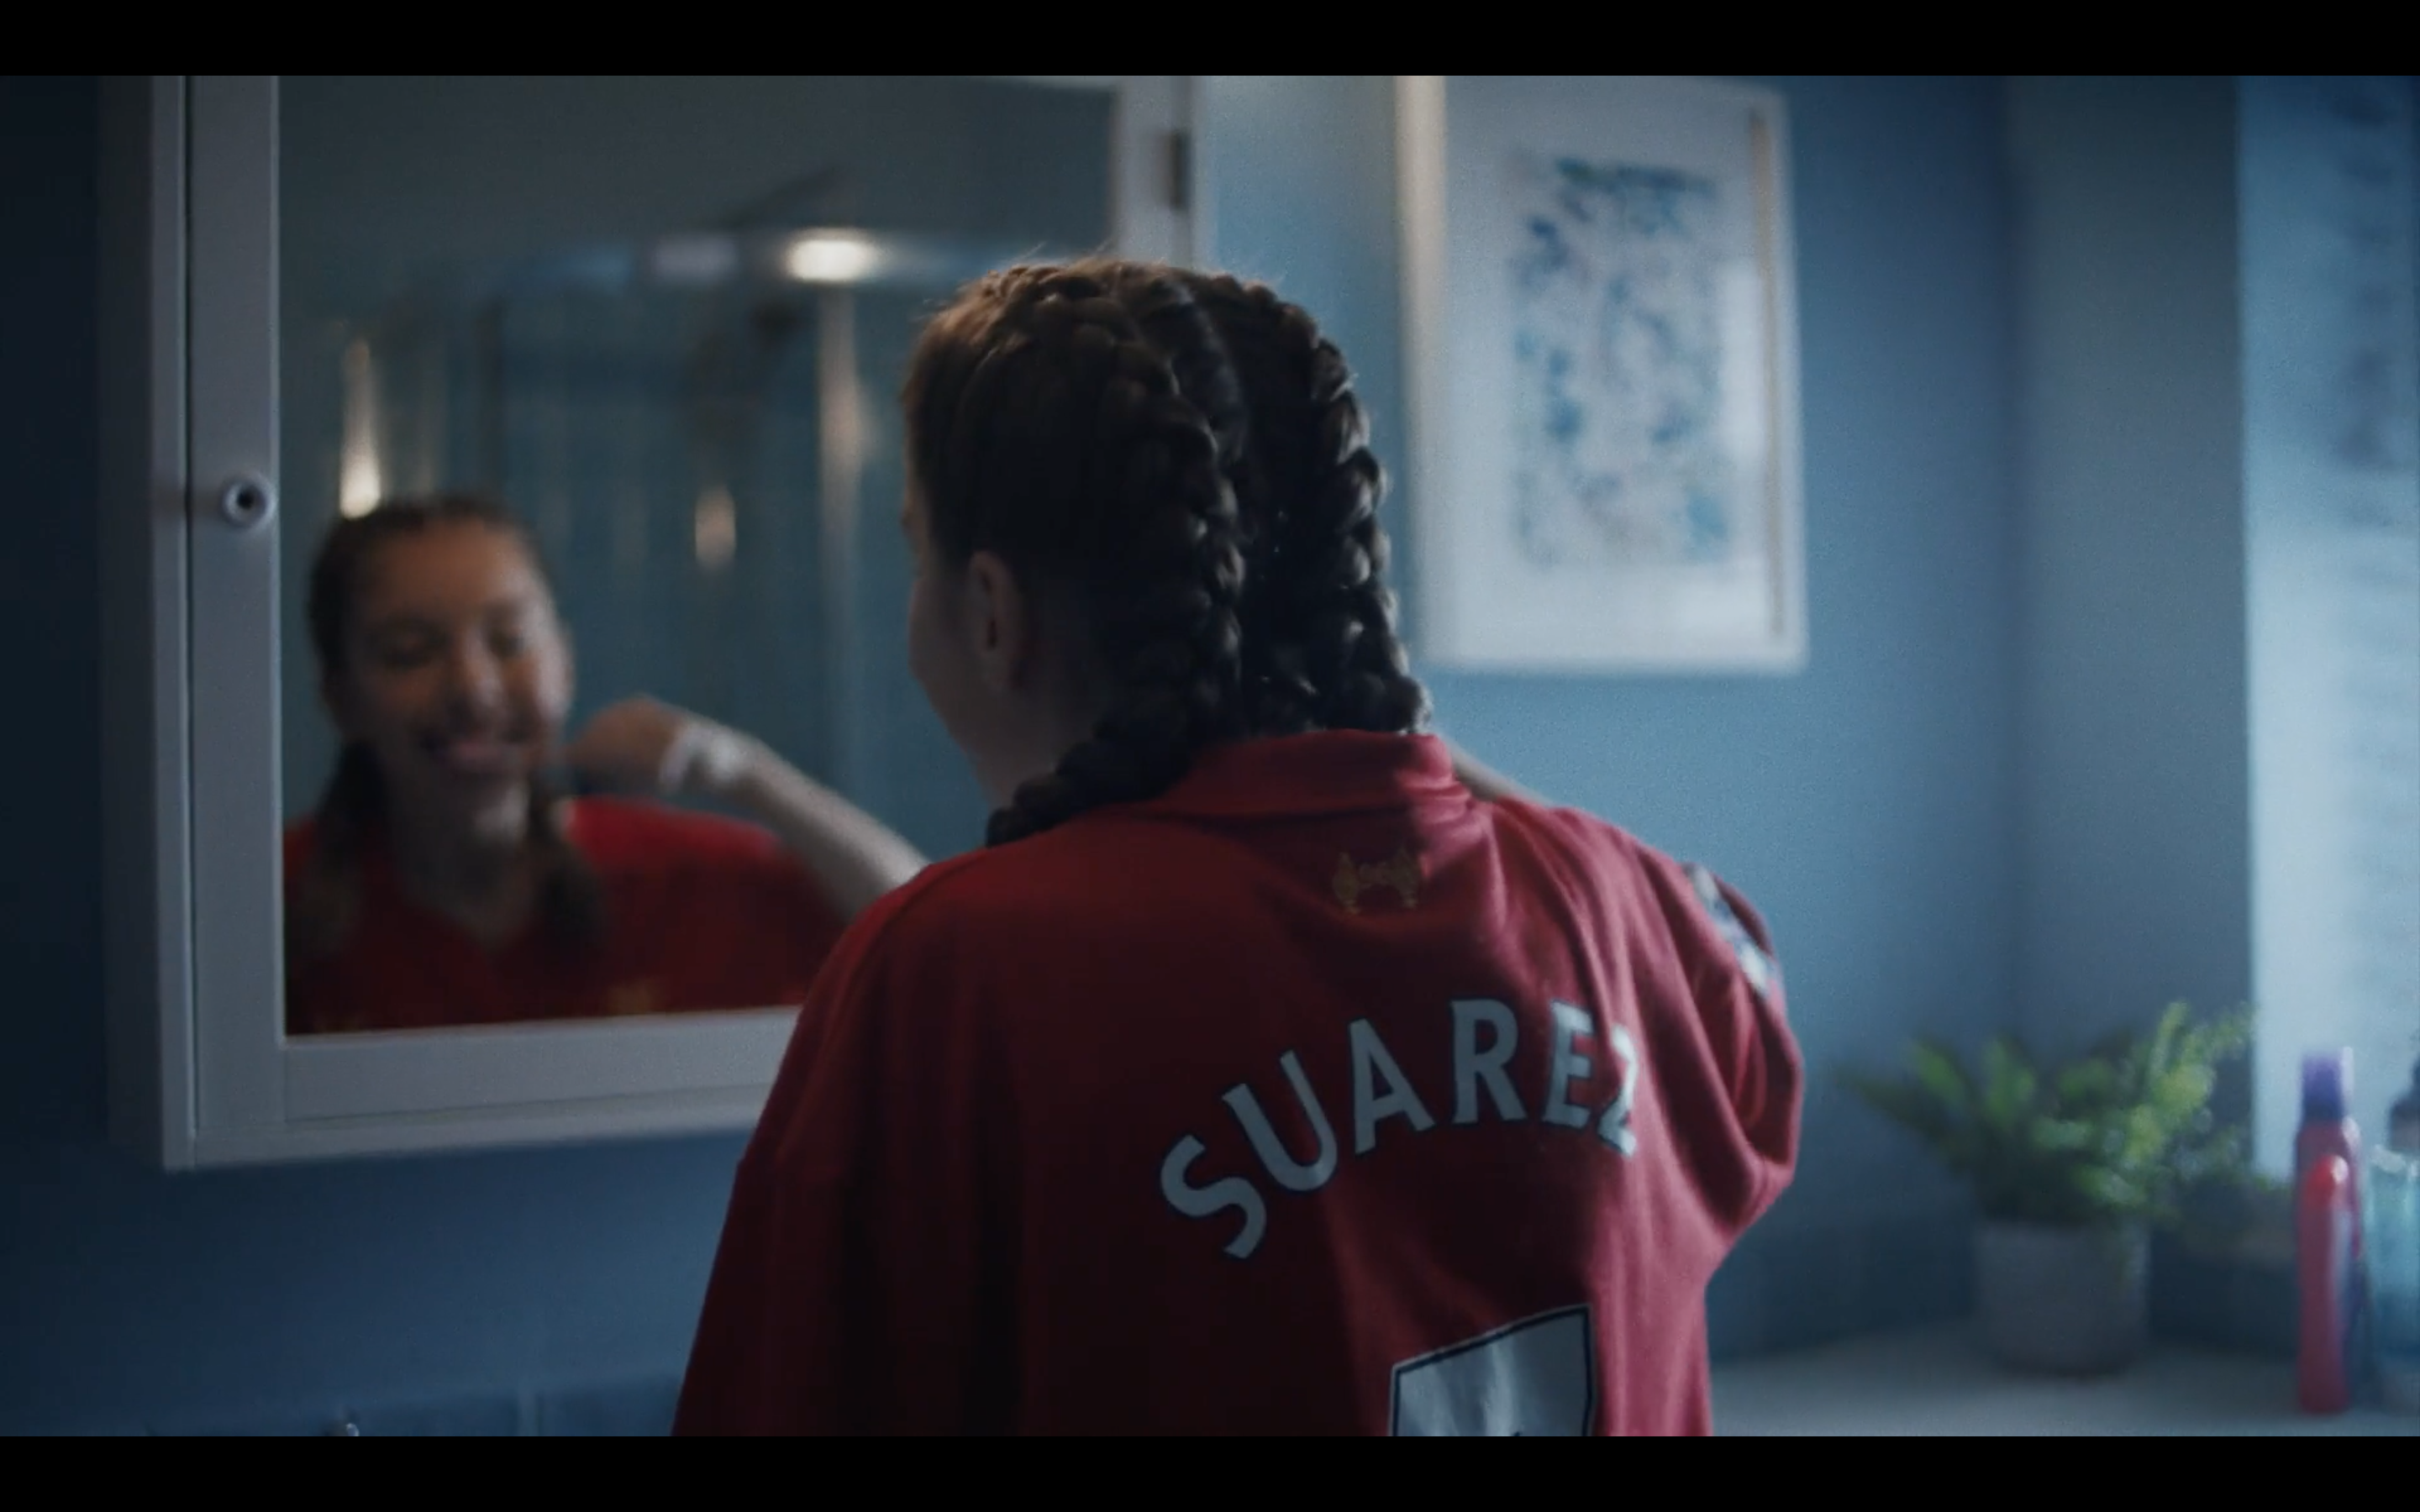 Wake The Town Reimagines 'You'll Never Walk Alone' for Standard Chartered Bank